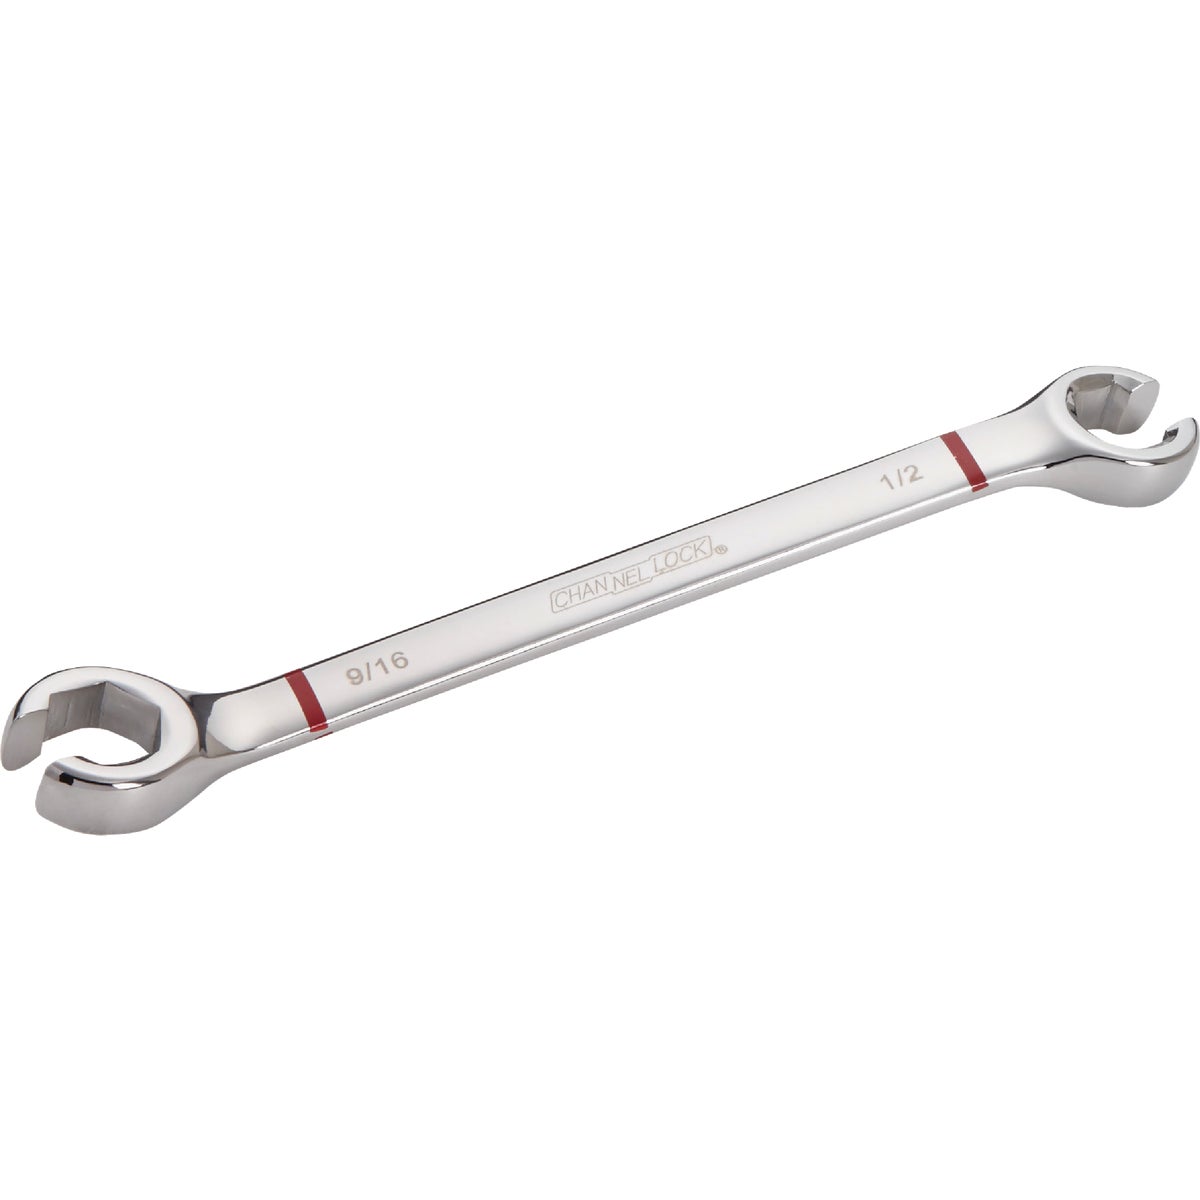 Channellock Standard 1/2 In. x 9/16 In. 6-Point Flare Nut Wrench